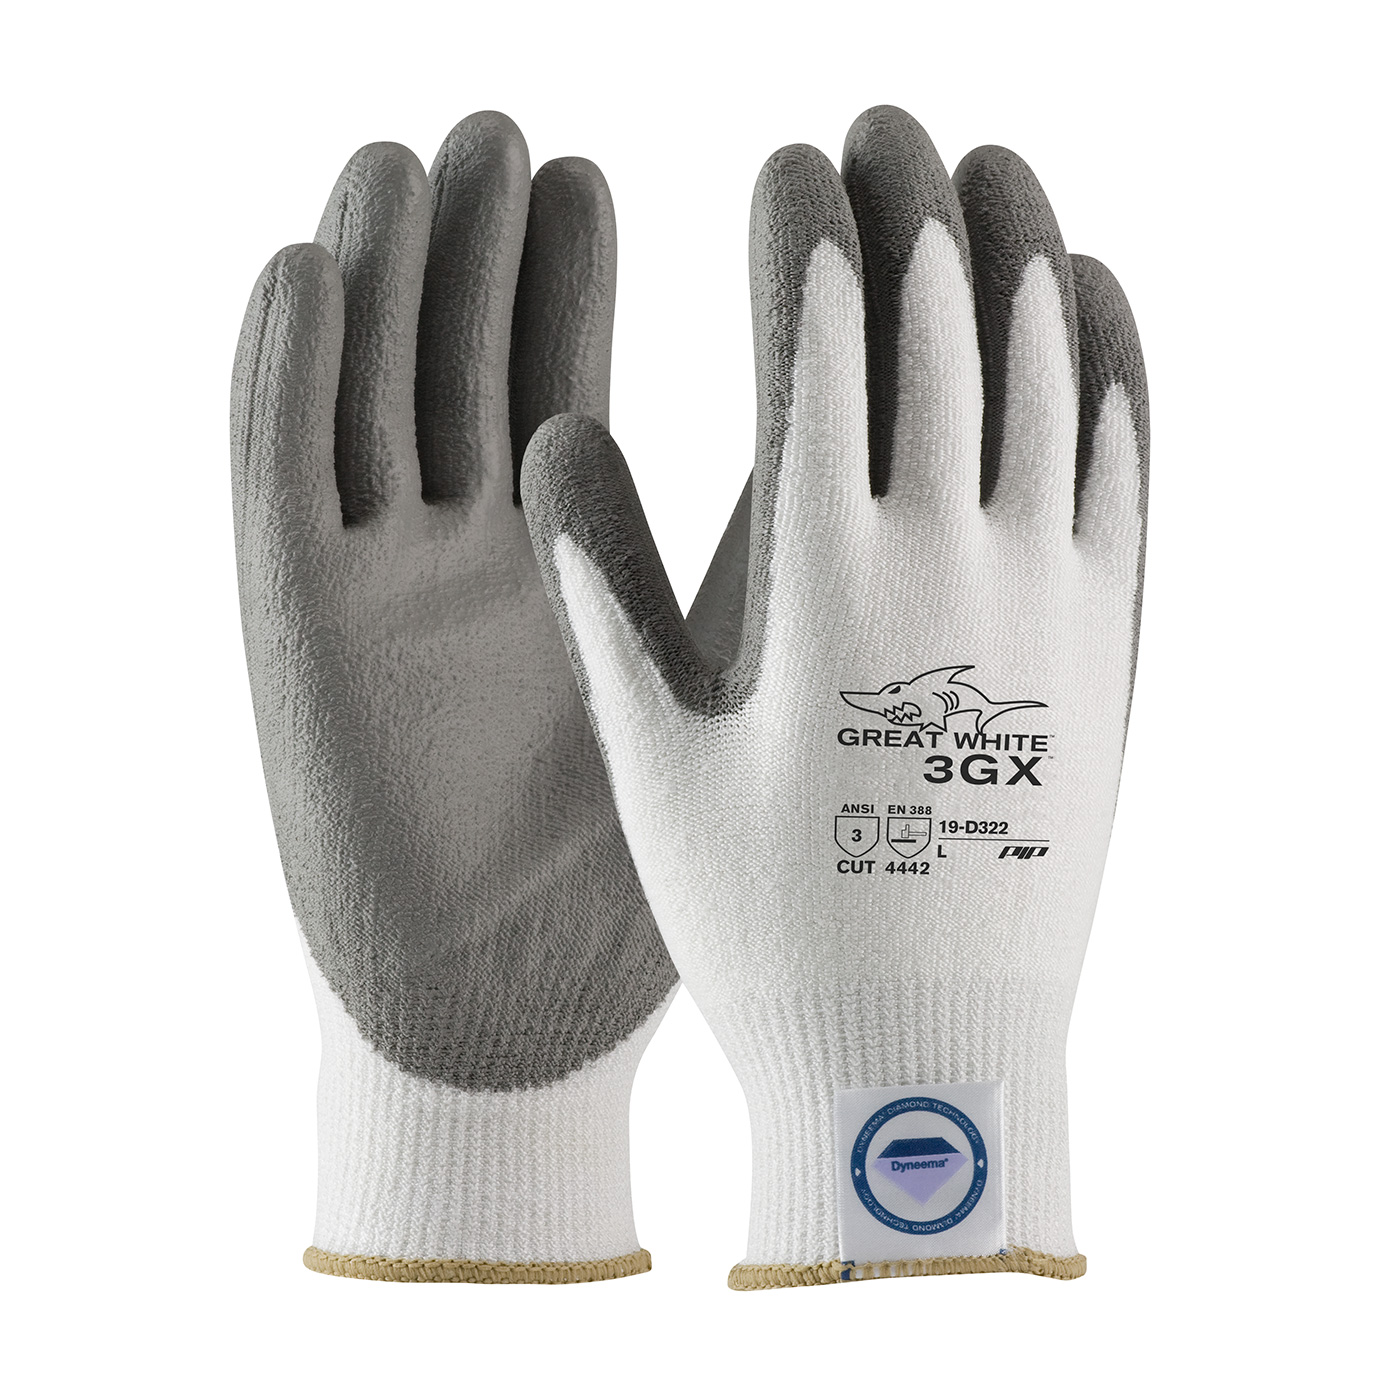 PIP 19-D322/M Great White 3GX Seamless Knit Dyneema Diamond Blended Glove with Polyurethane Coated Smooth Grip on Palm & Fingers - Medium PID-19 D322 M